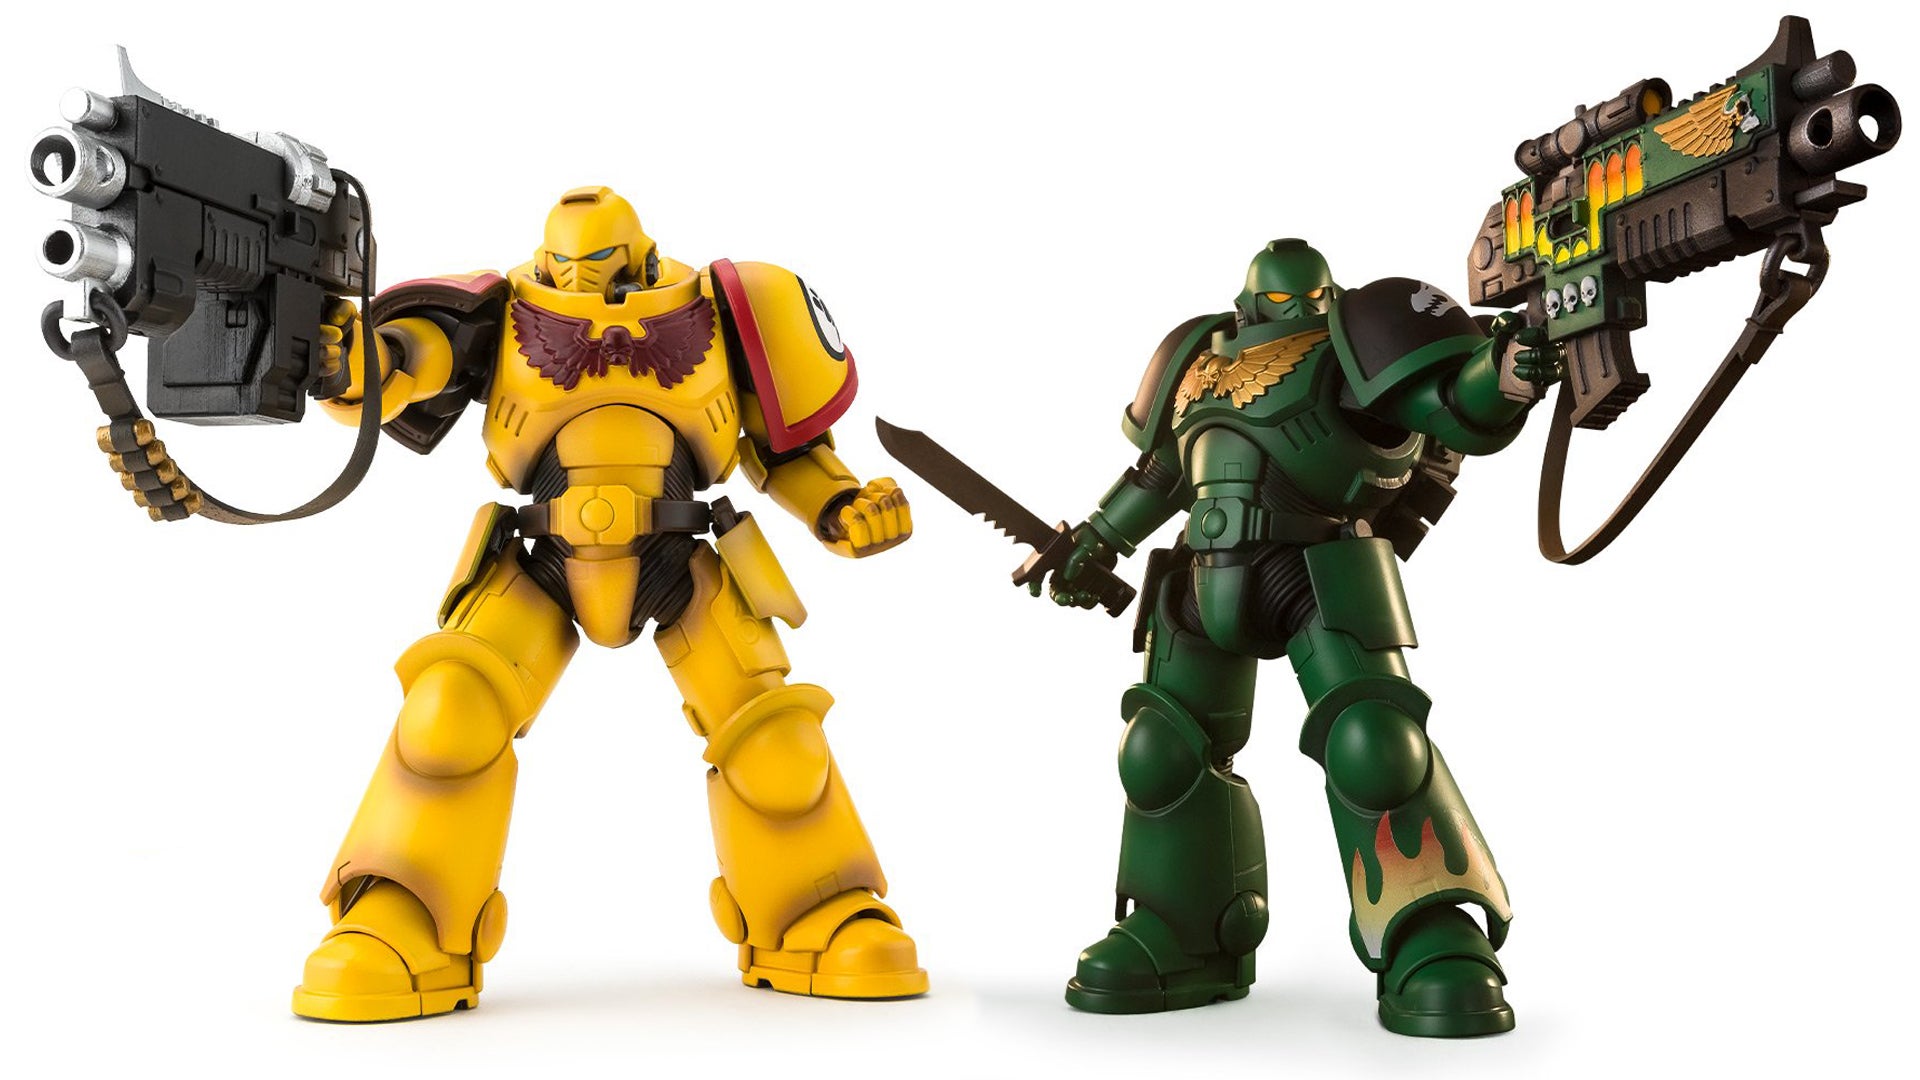 Image for Warhammer 40,000 is getting new Primaris Space Marine action figures